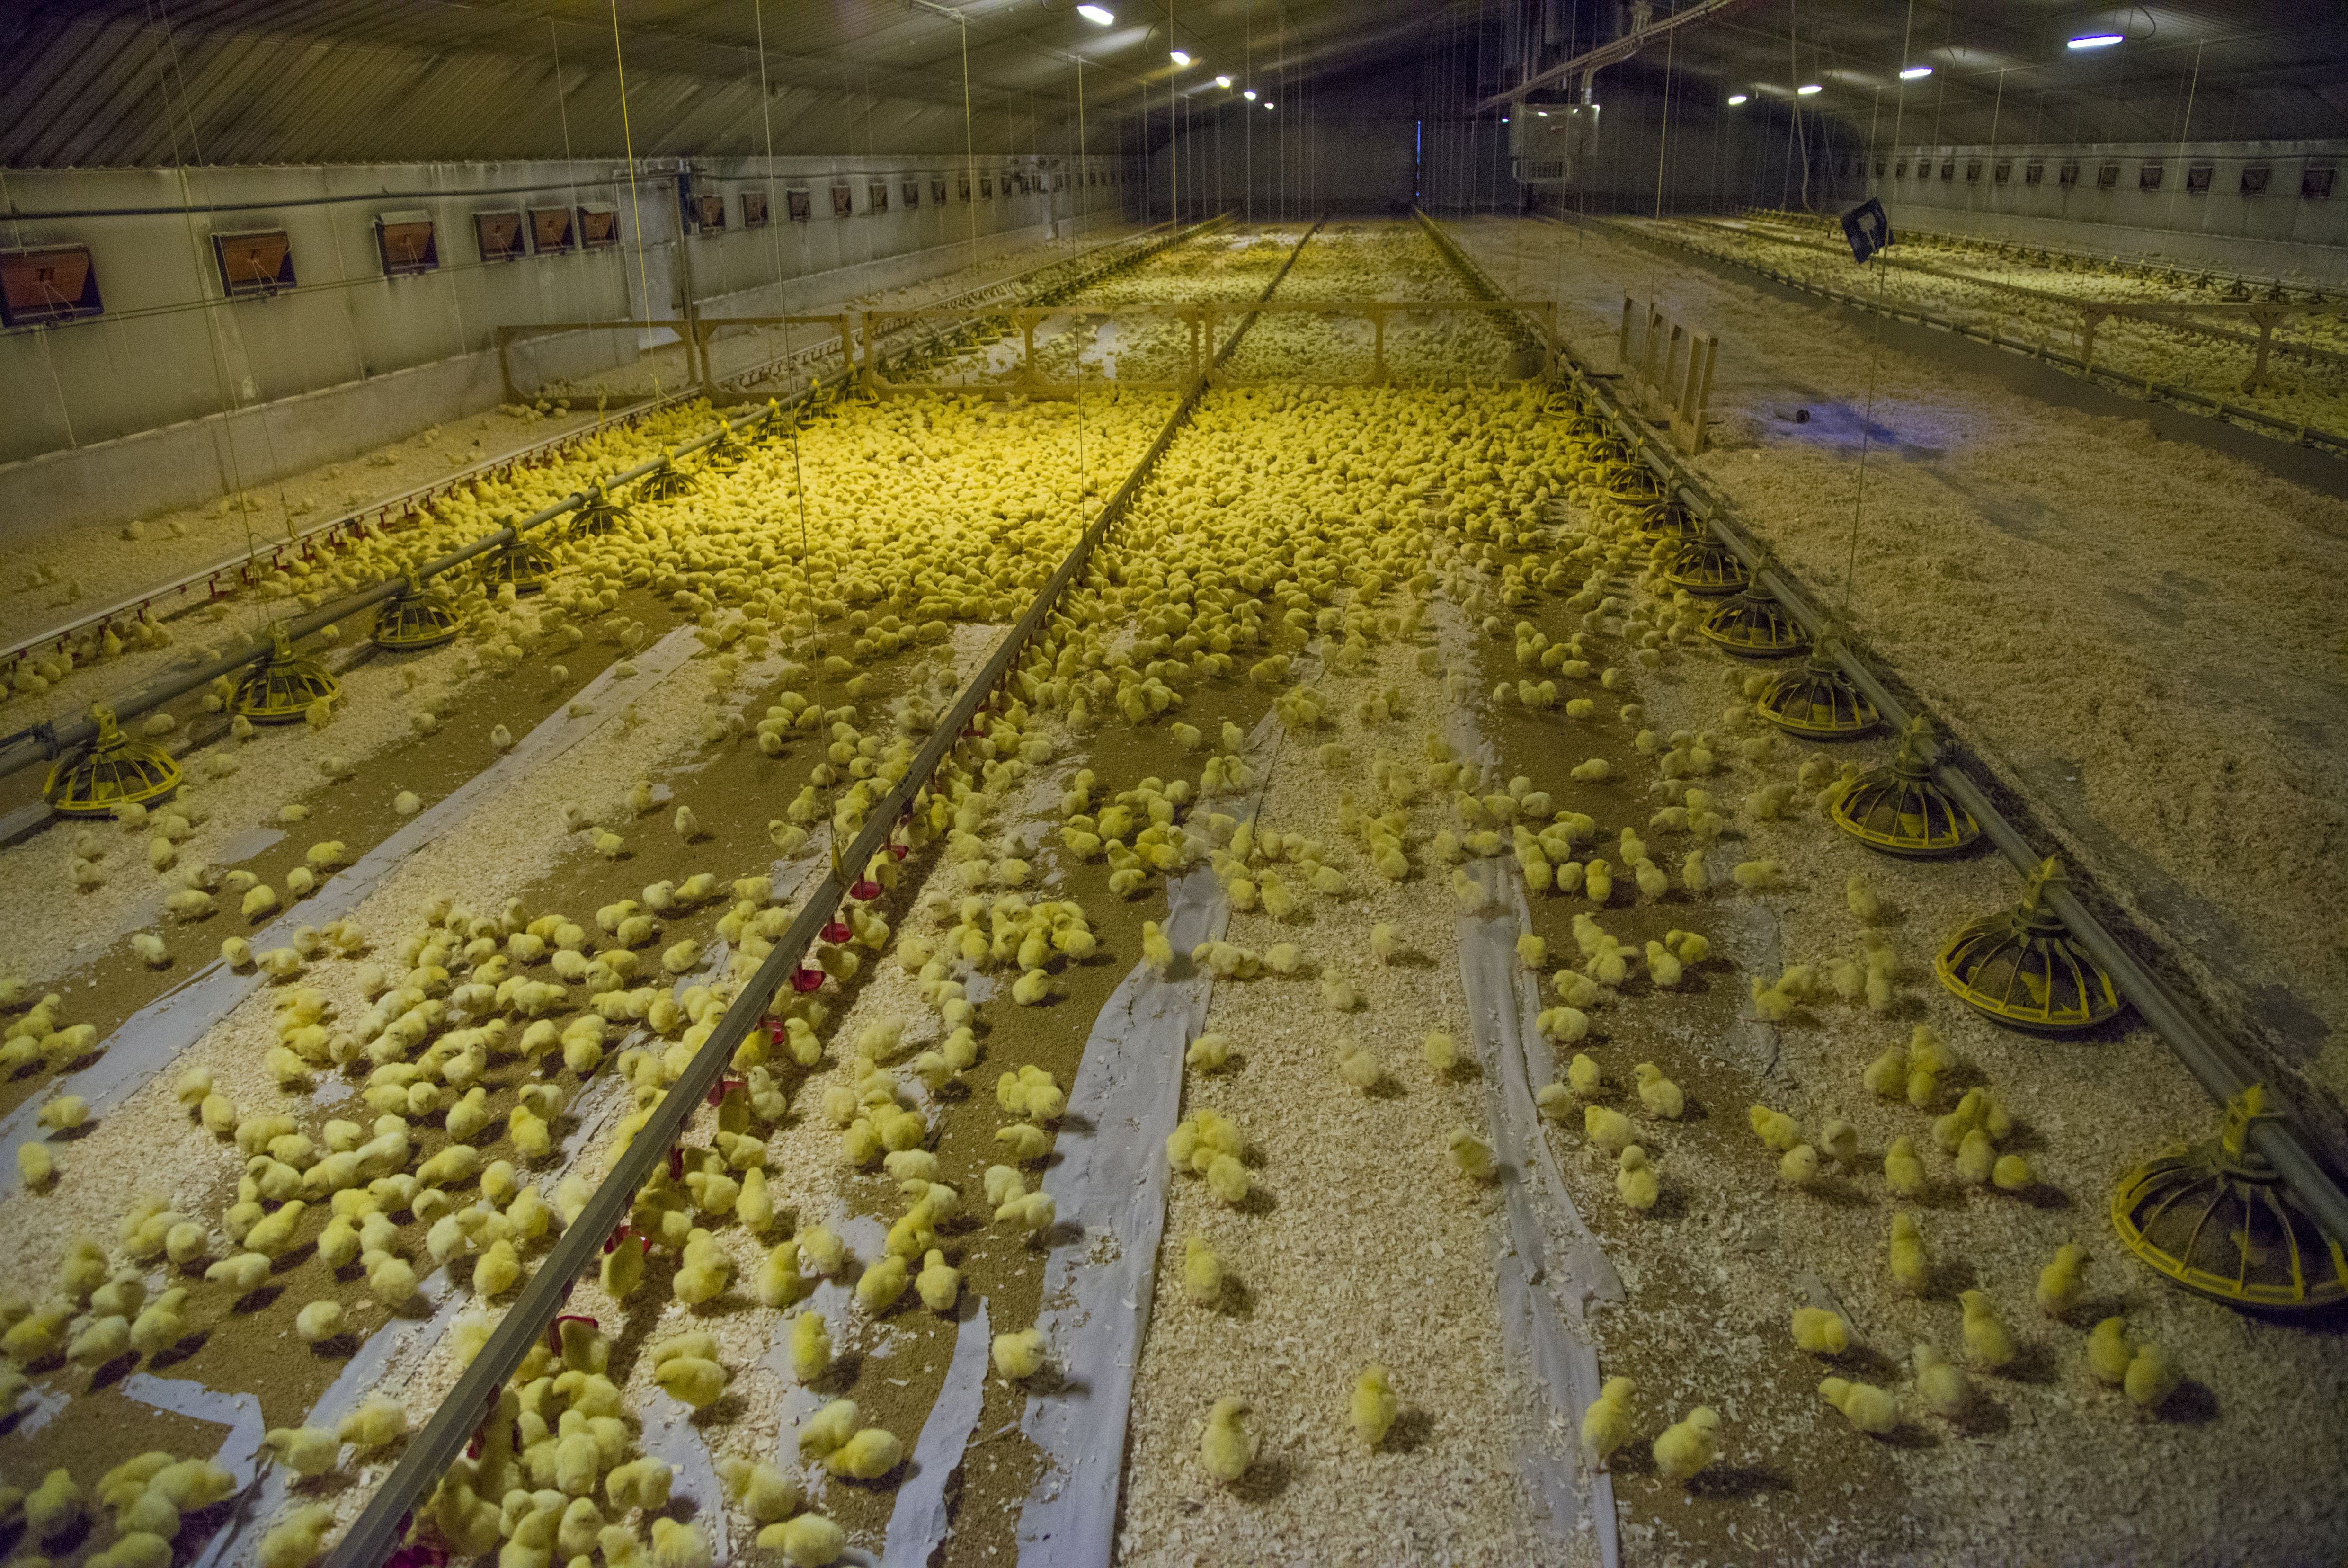 Red tractor assured hatcheries must now only handle assured eggs to reduce any reputational risk. Photo: John Eveson/REX/Shutterstock